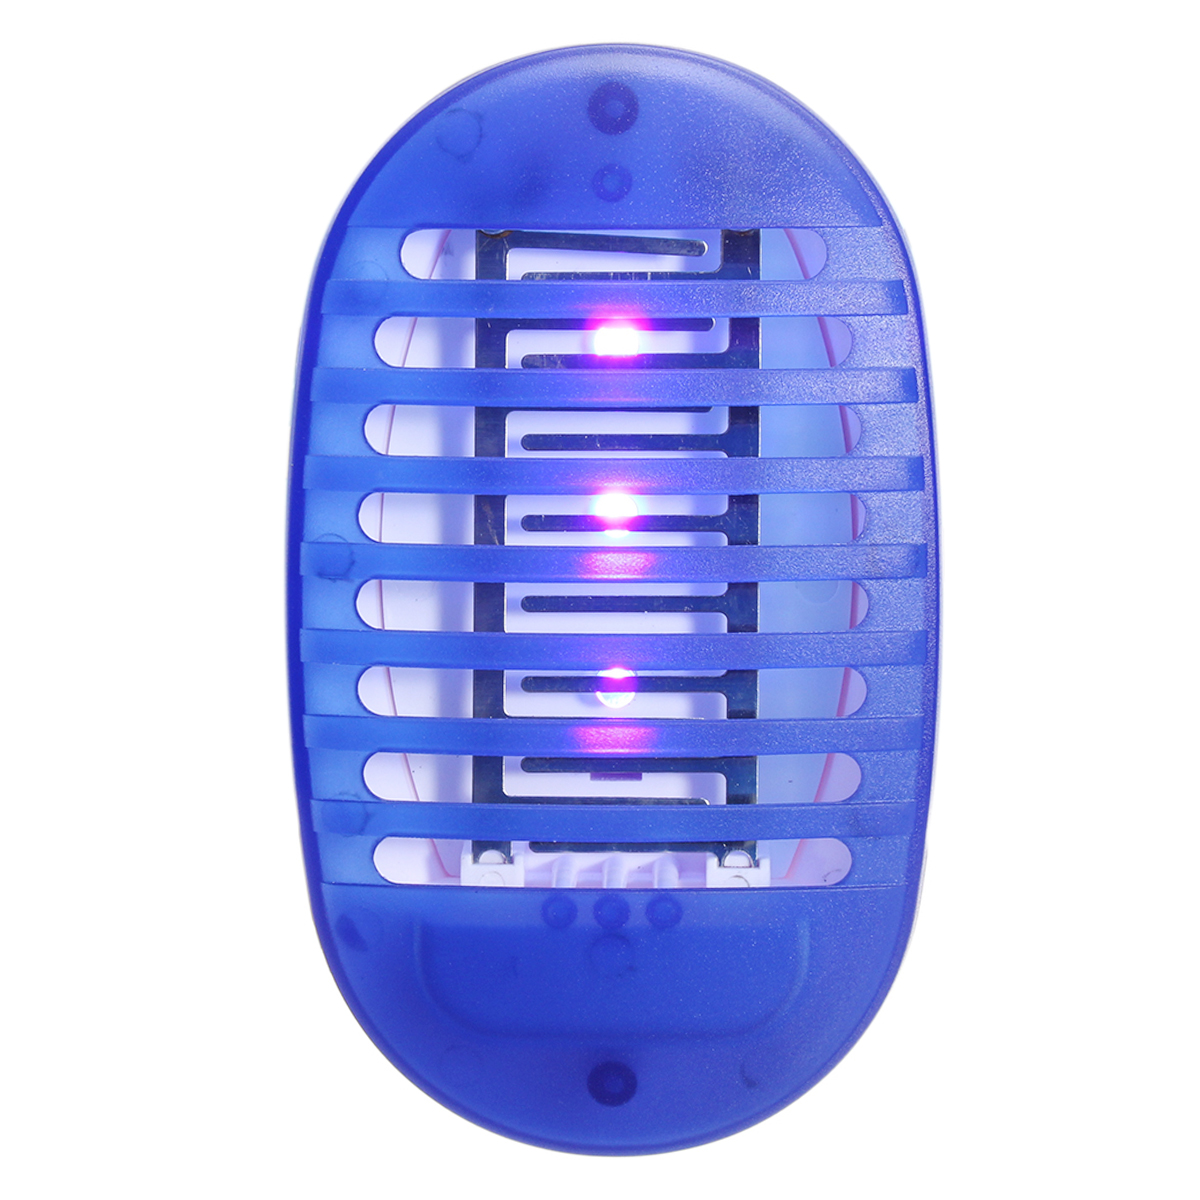 

UV Light Electric Mosquito Fly Bug Insect Trap Zapper Killer Night Lamp Mosquito Dispeller